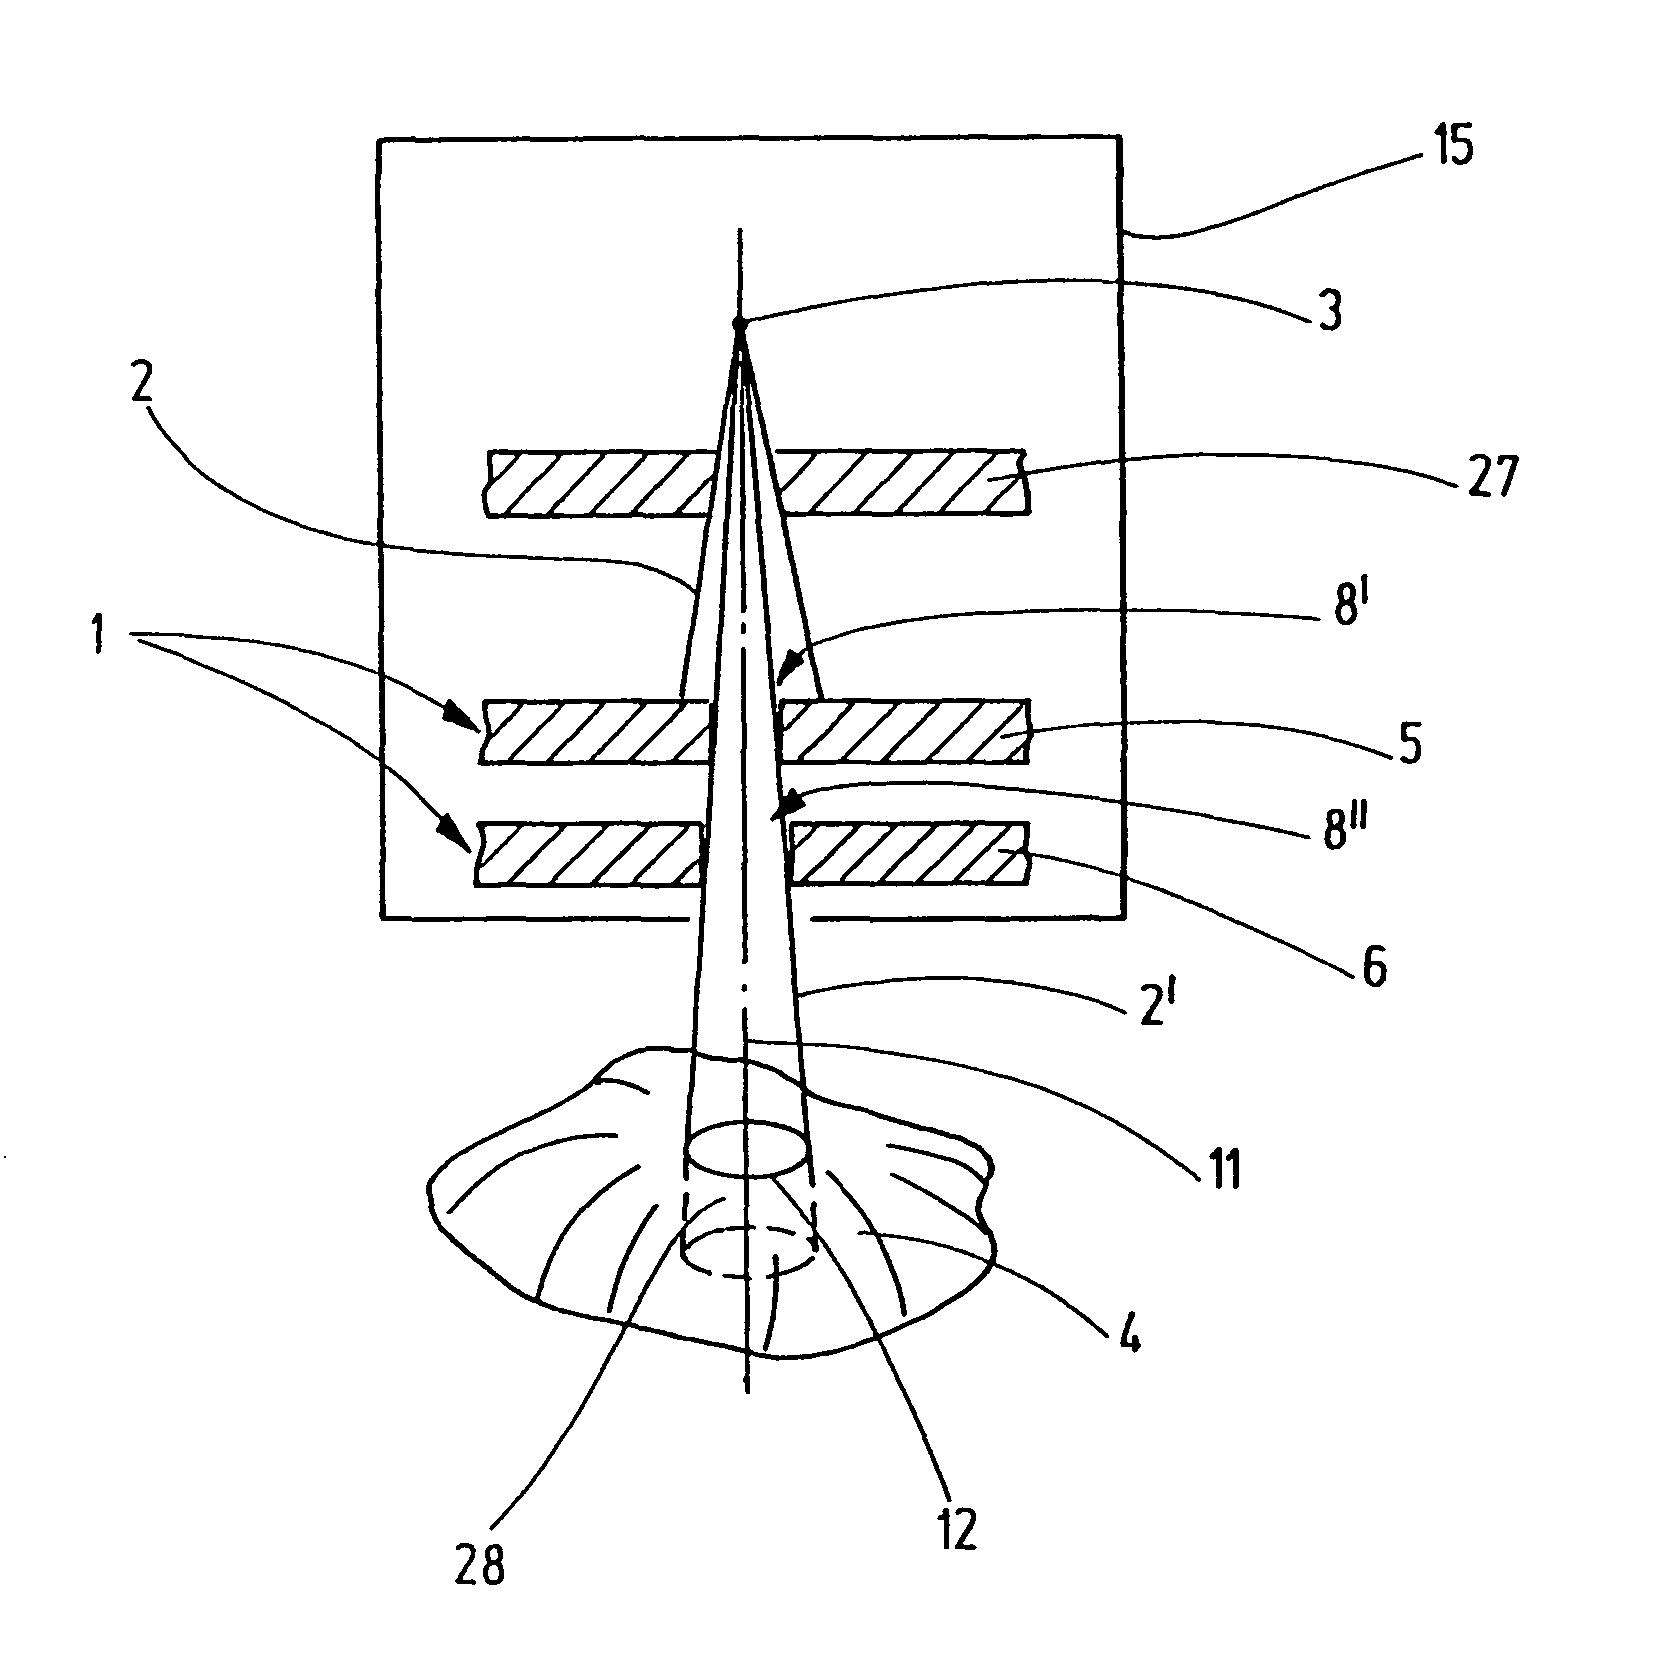 Irradiation device and collimator